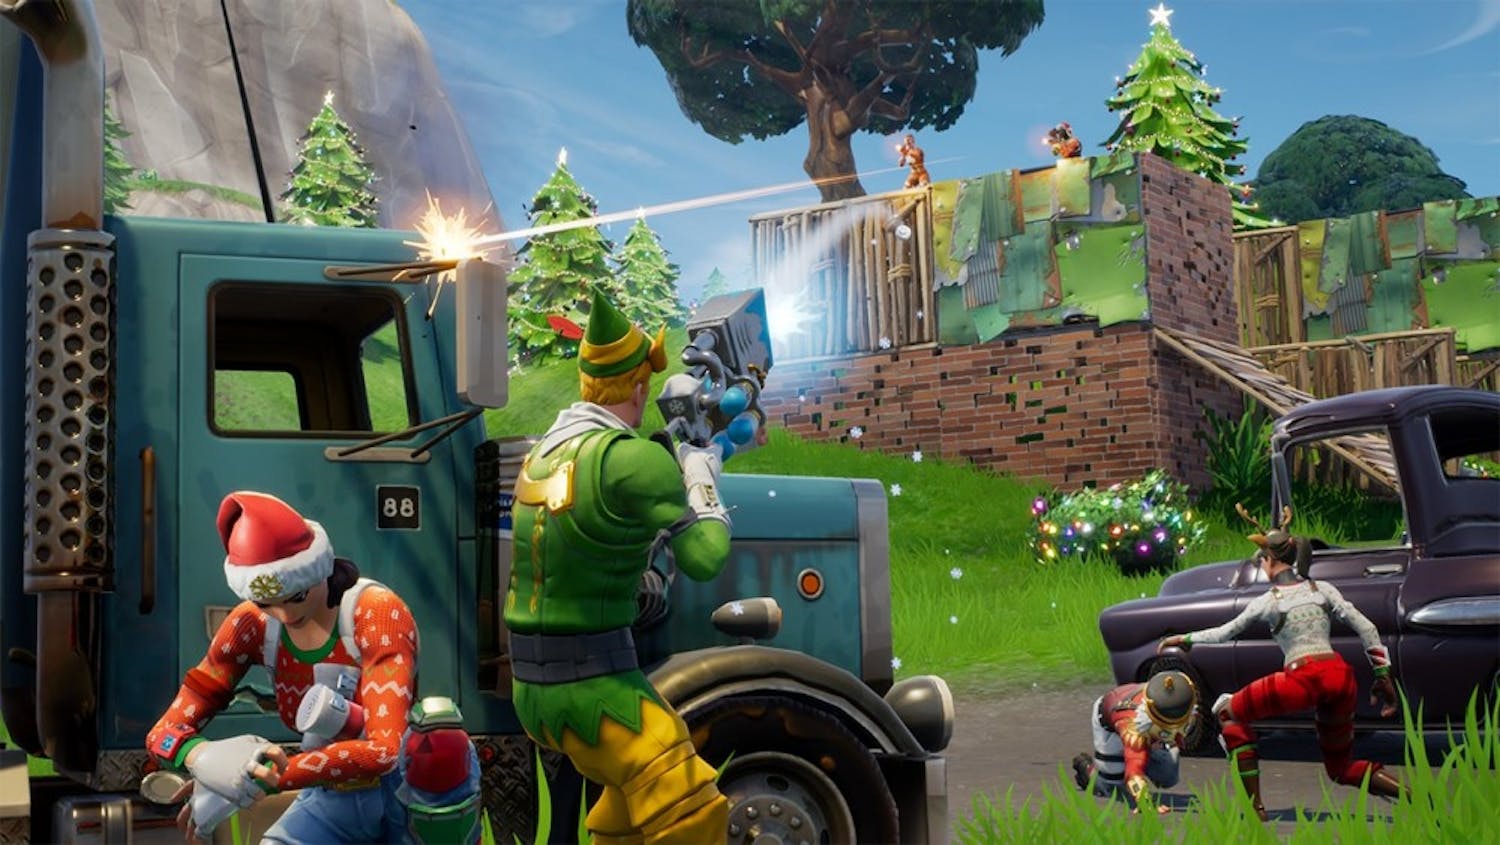 With the release of incredibly popular games like “Fortnite," it’s clearer than ever that the appeal of online multiplayer games is real.